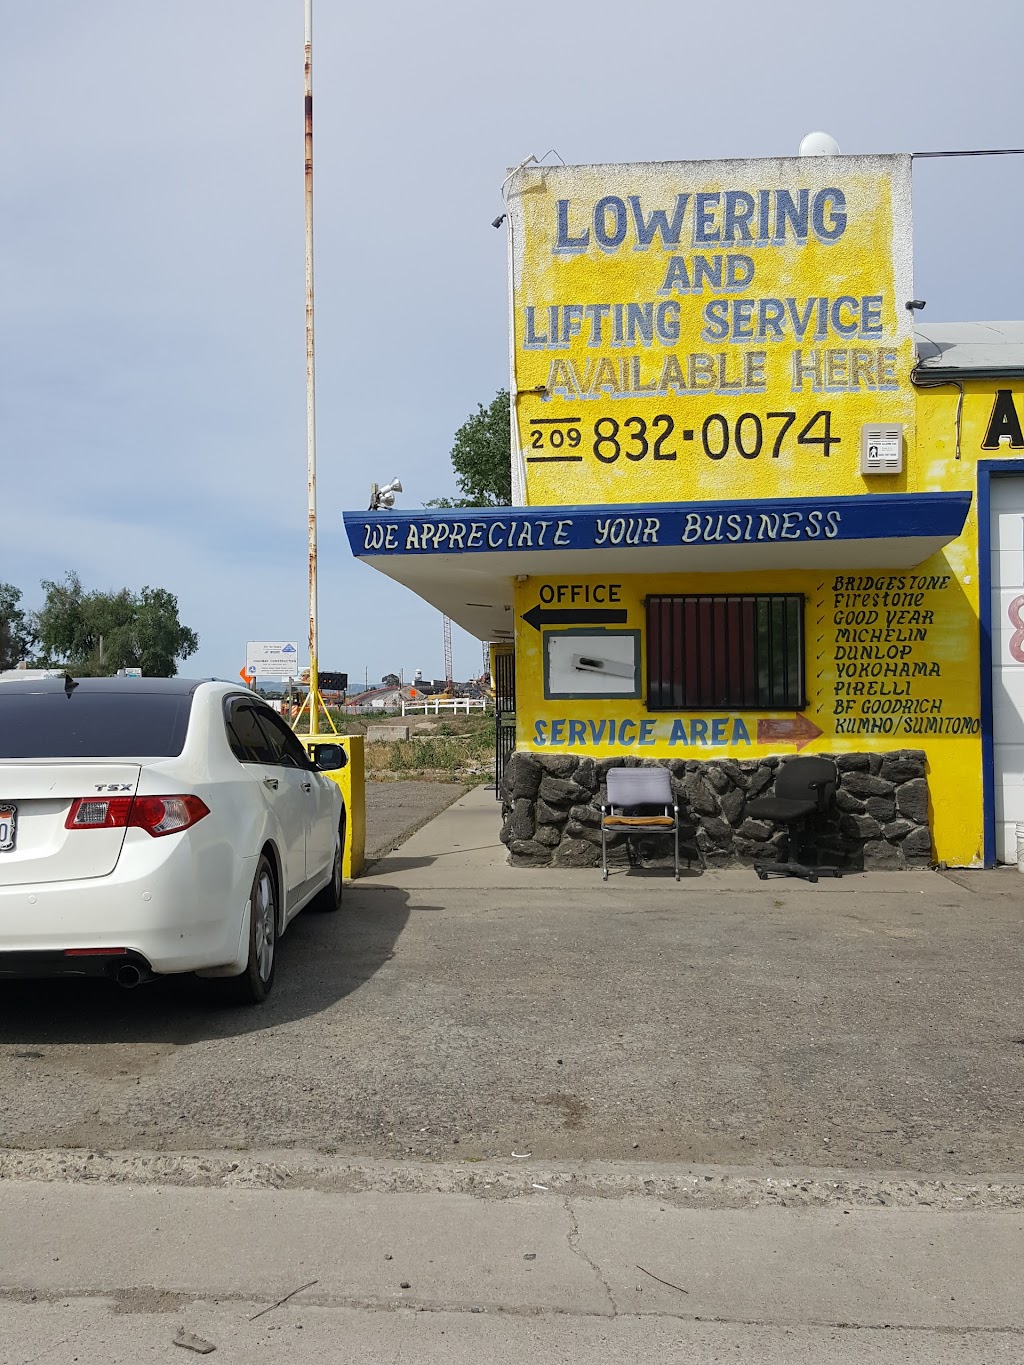 Best Deal Tire & Wheel Services | 7979 Eleventh St Cross street is, Darrigo Dr, Tracy, CA 95304, USA | Phone: (209) 832-0074